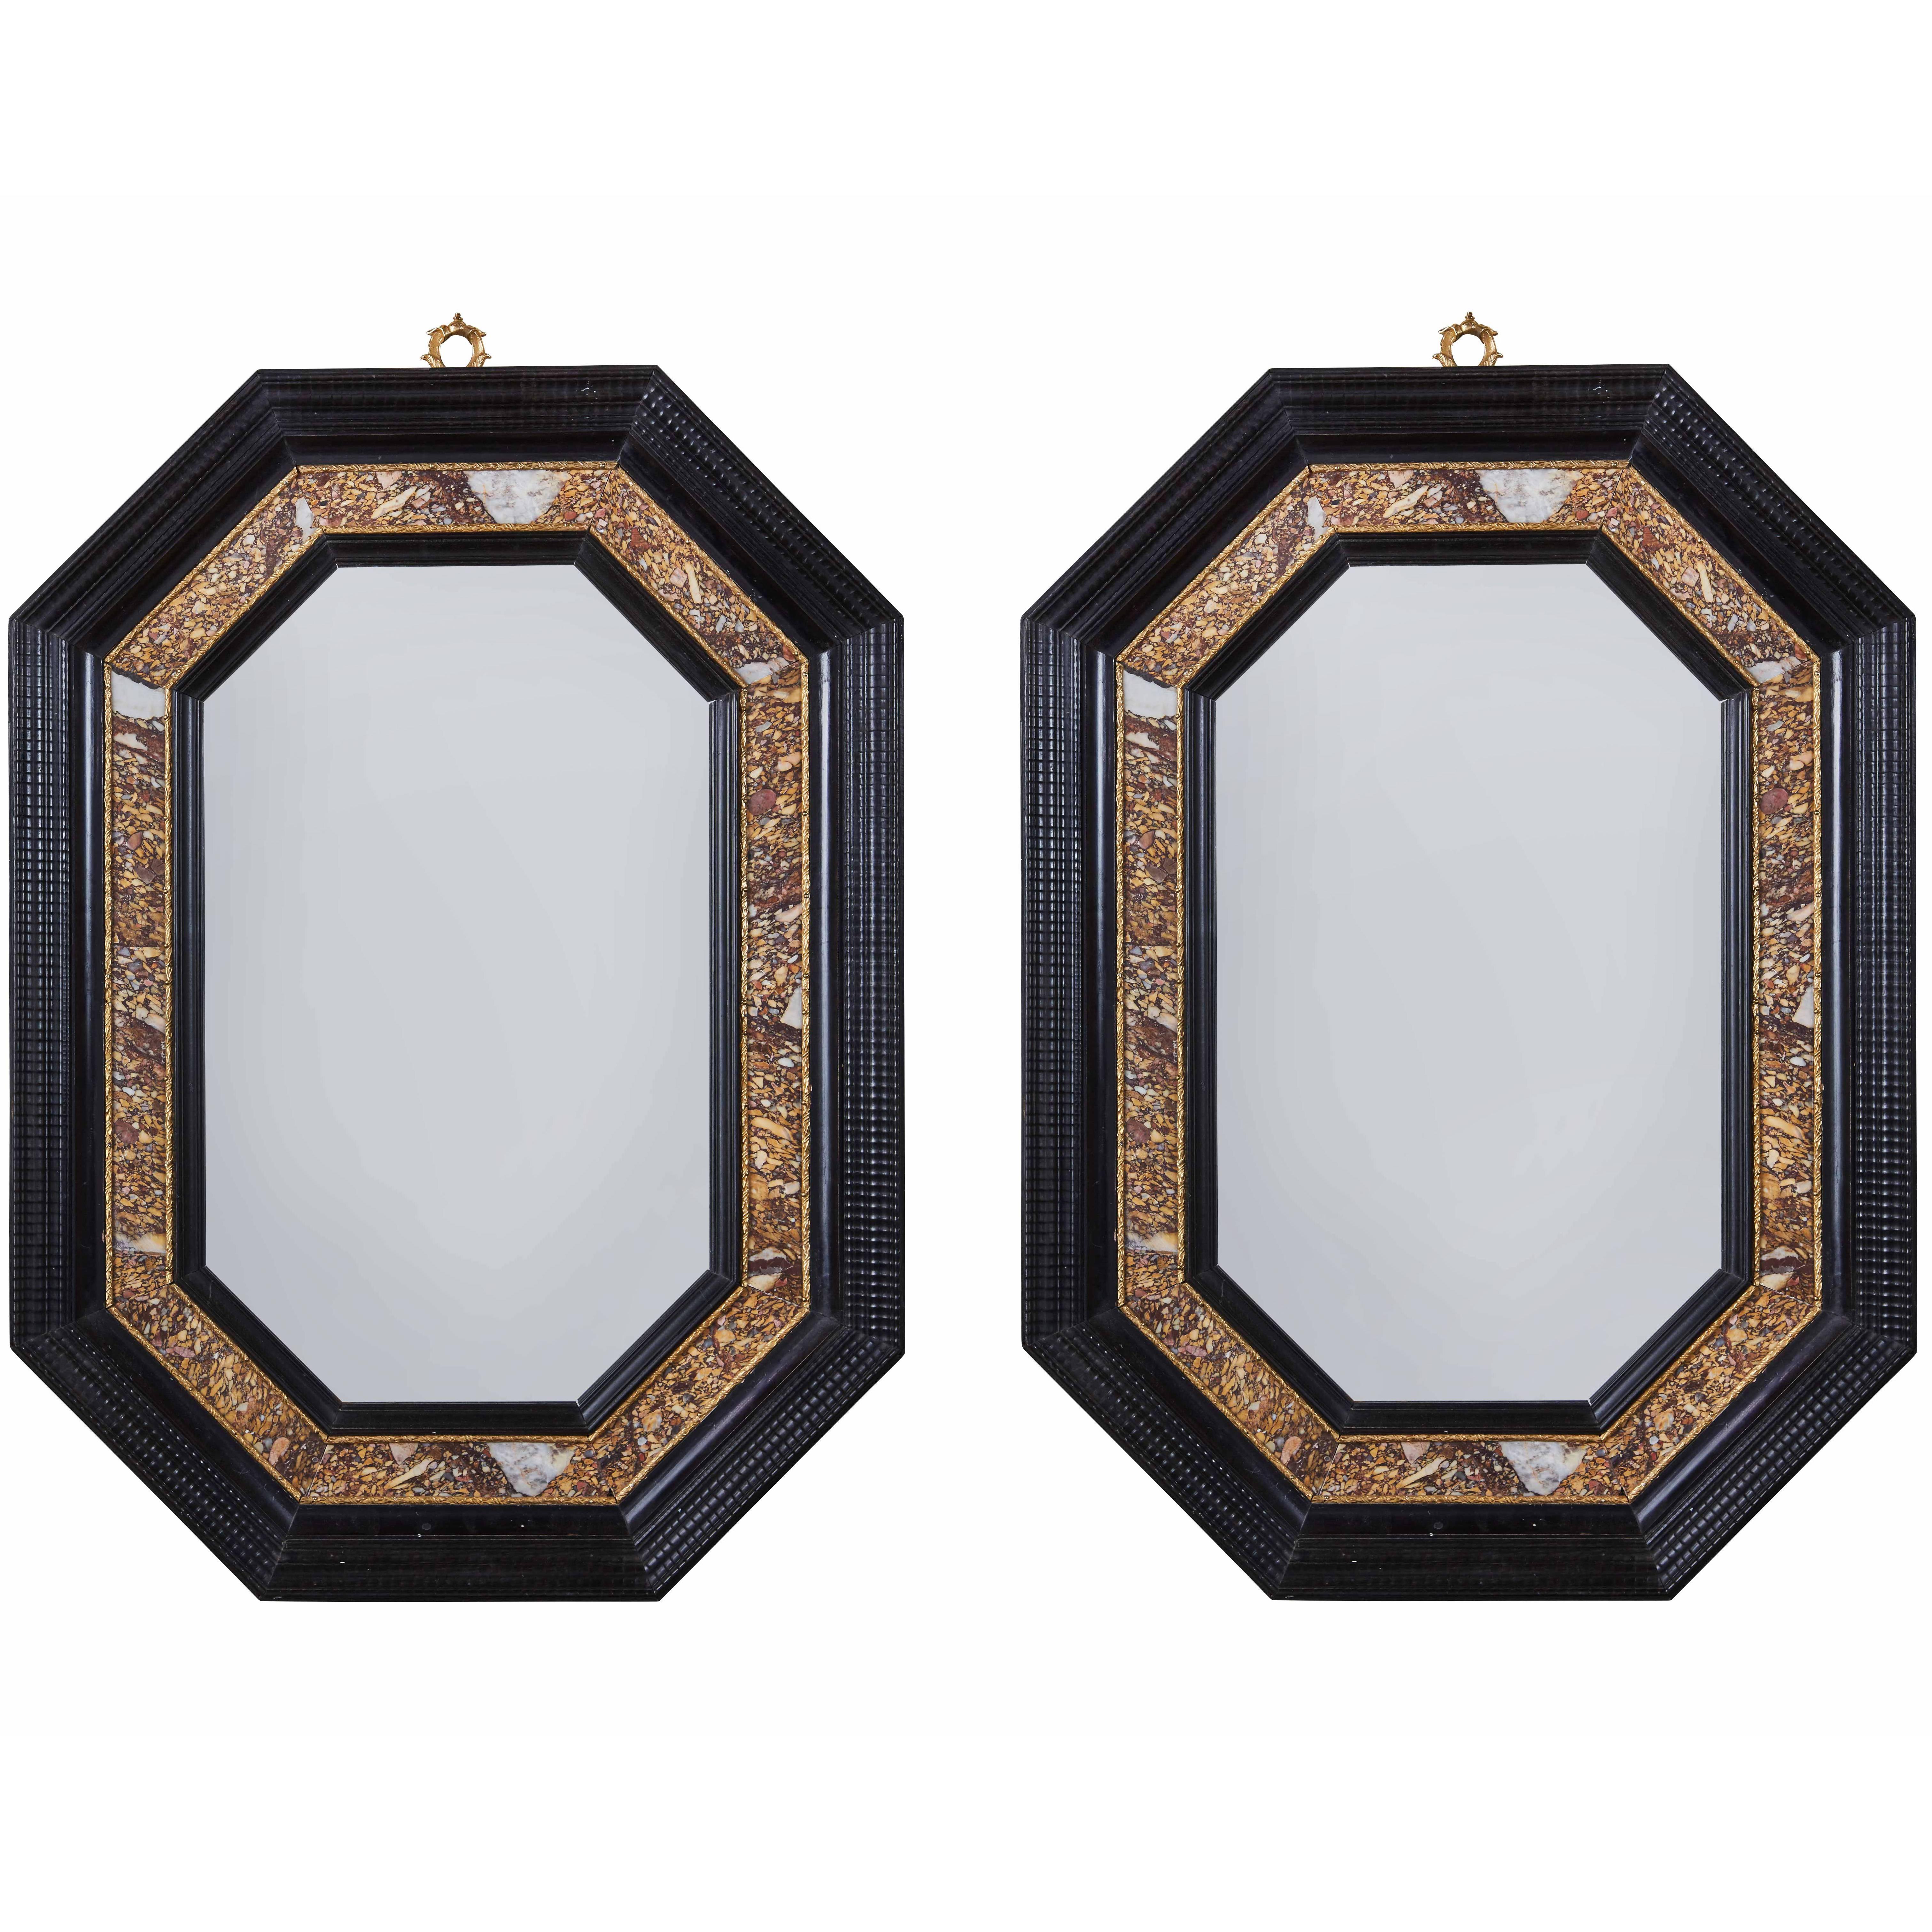 Handsome Pair of Marble Inlaid, Italian Mirrors